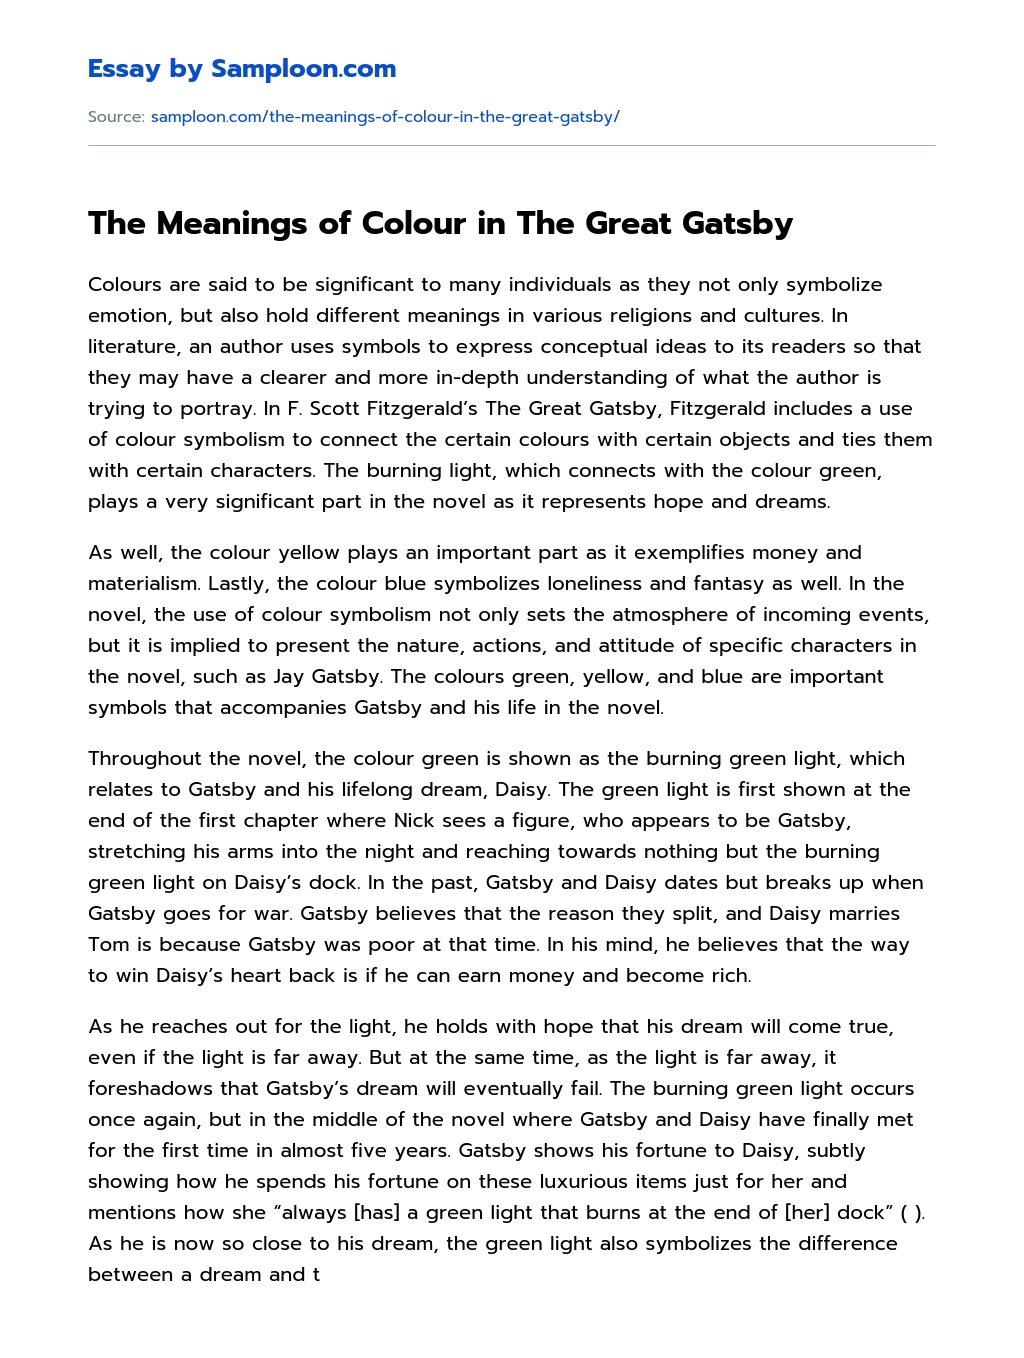 The Meanings of Colour in The Great Gatsby essay